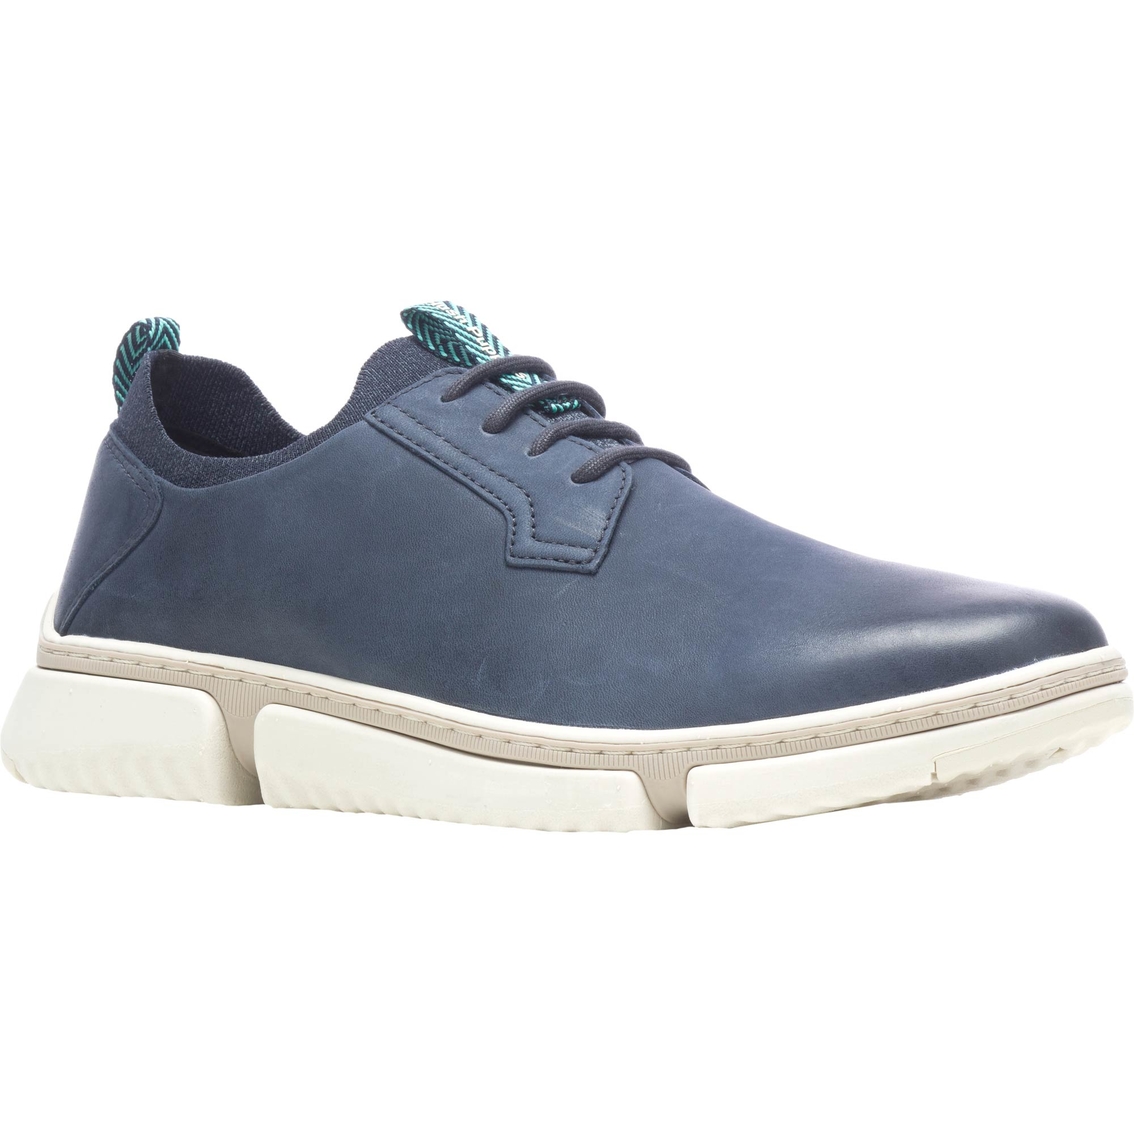 Hush Puppies Bennet Plain Toe V2 Oxford | Casuals | Shoes | Shop The ...